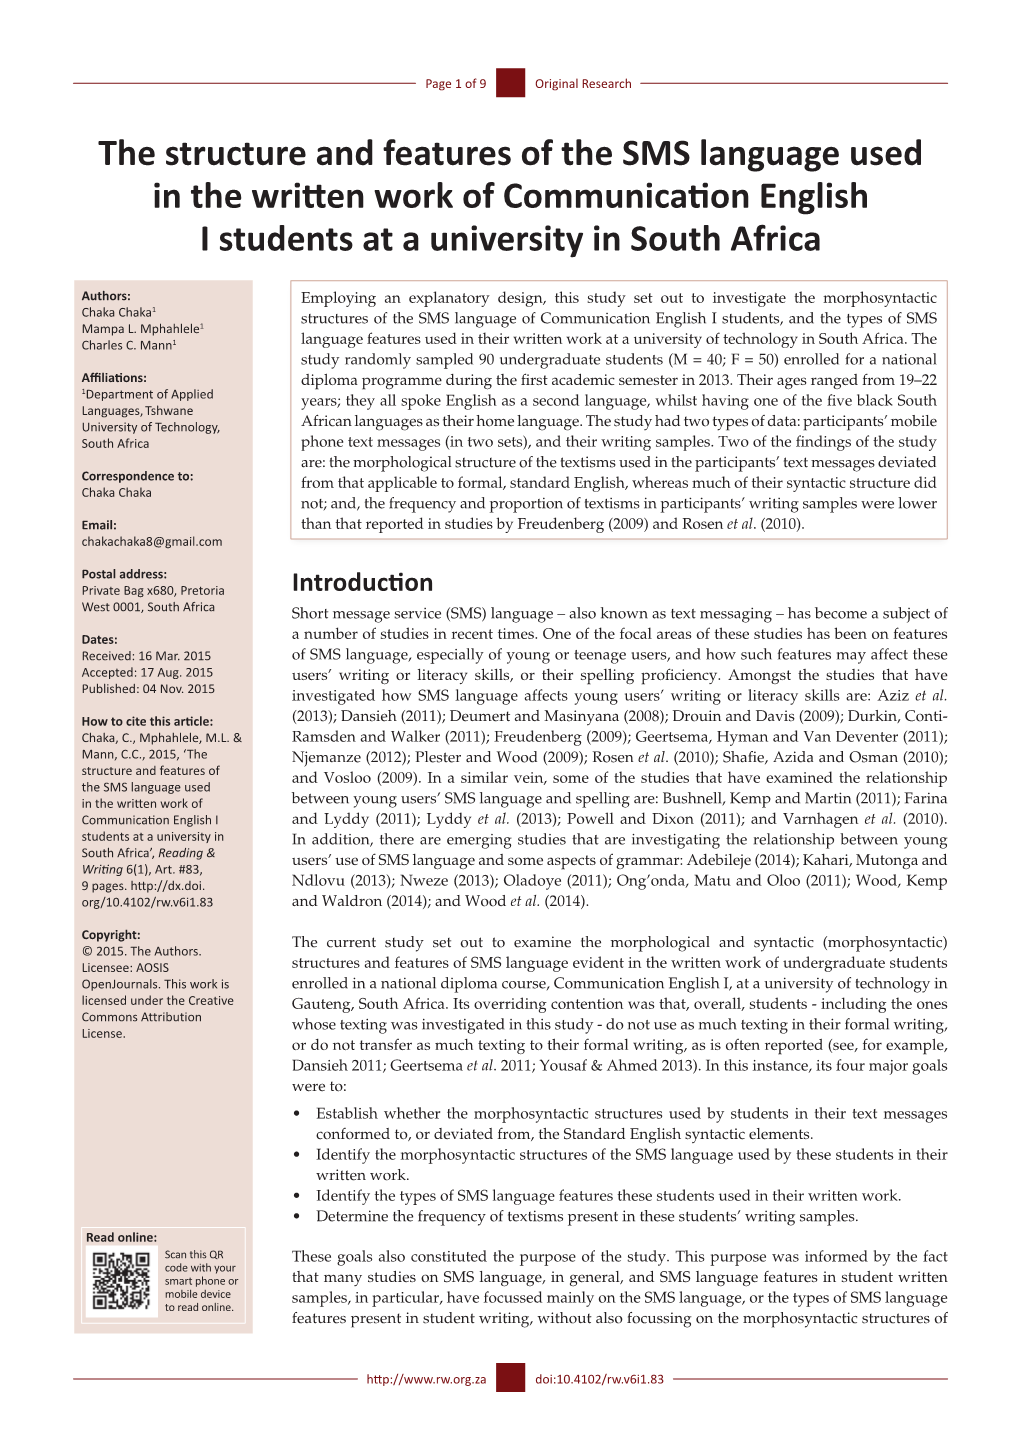 The Structure and Features of the SMS Language Used in the Written Work of Communication English I Students at a University in South Africa